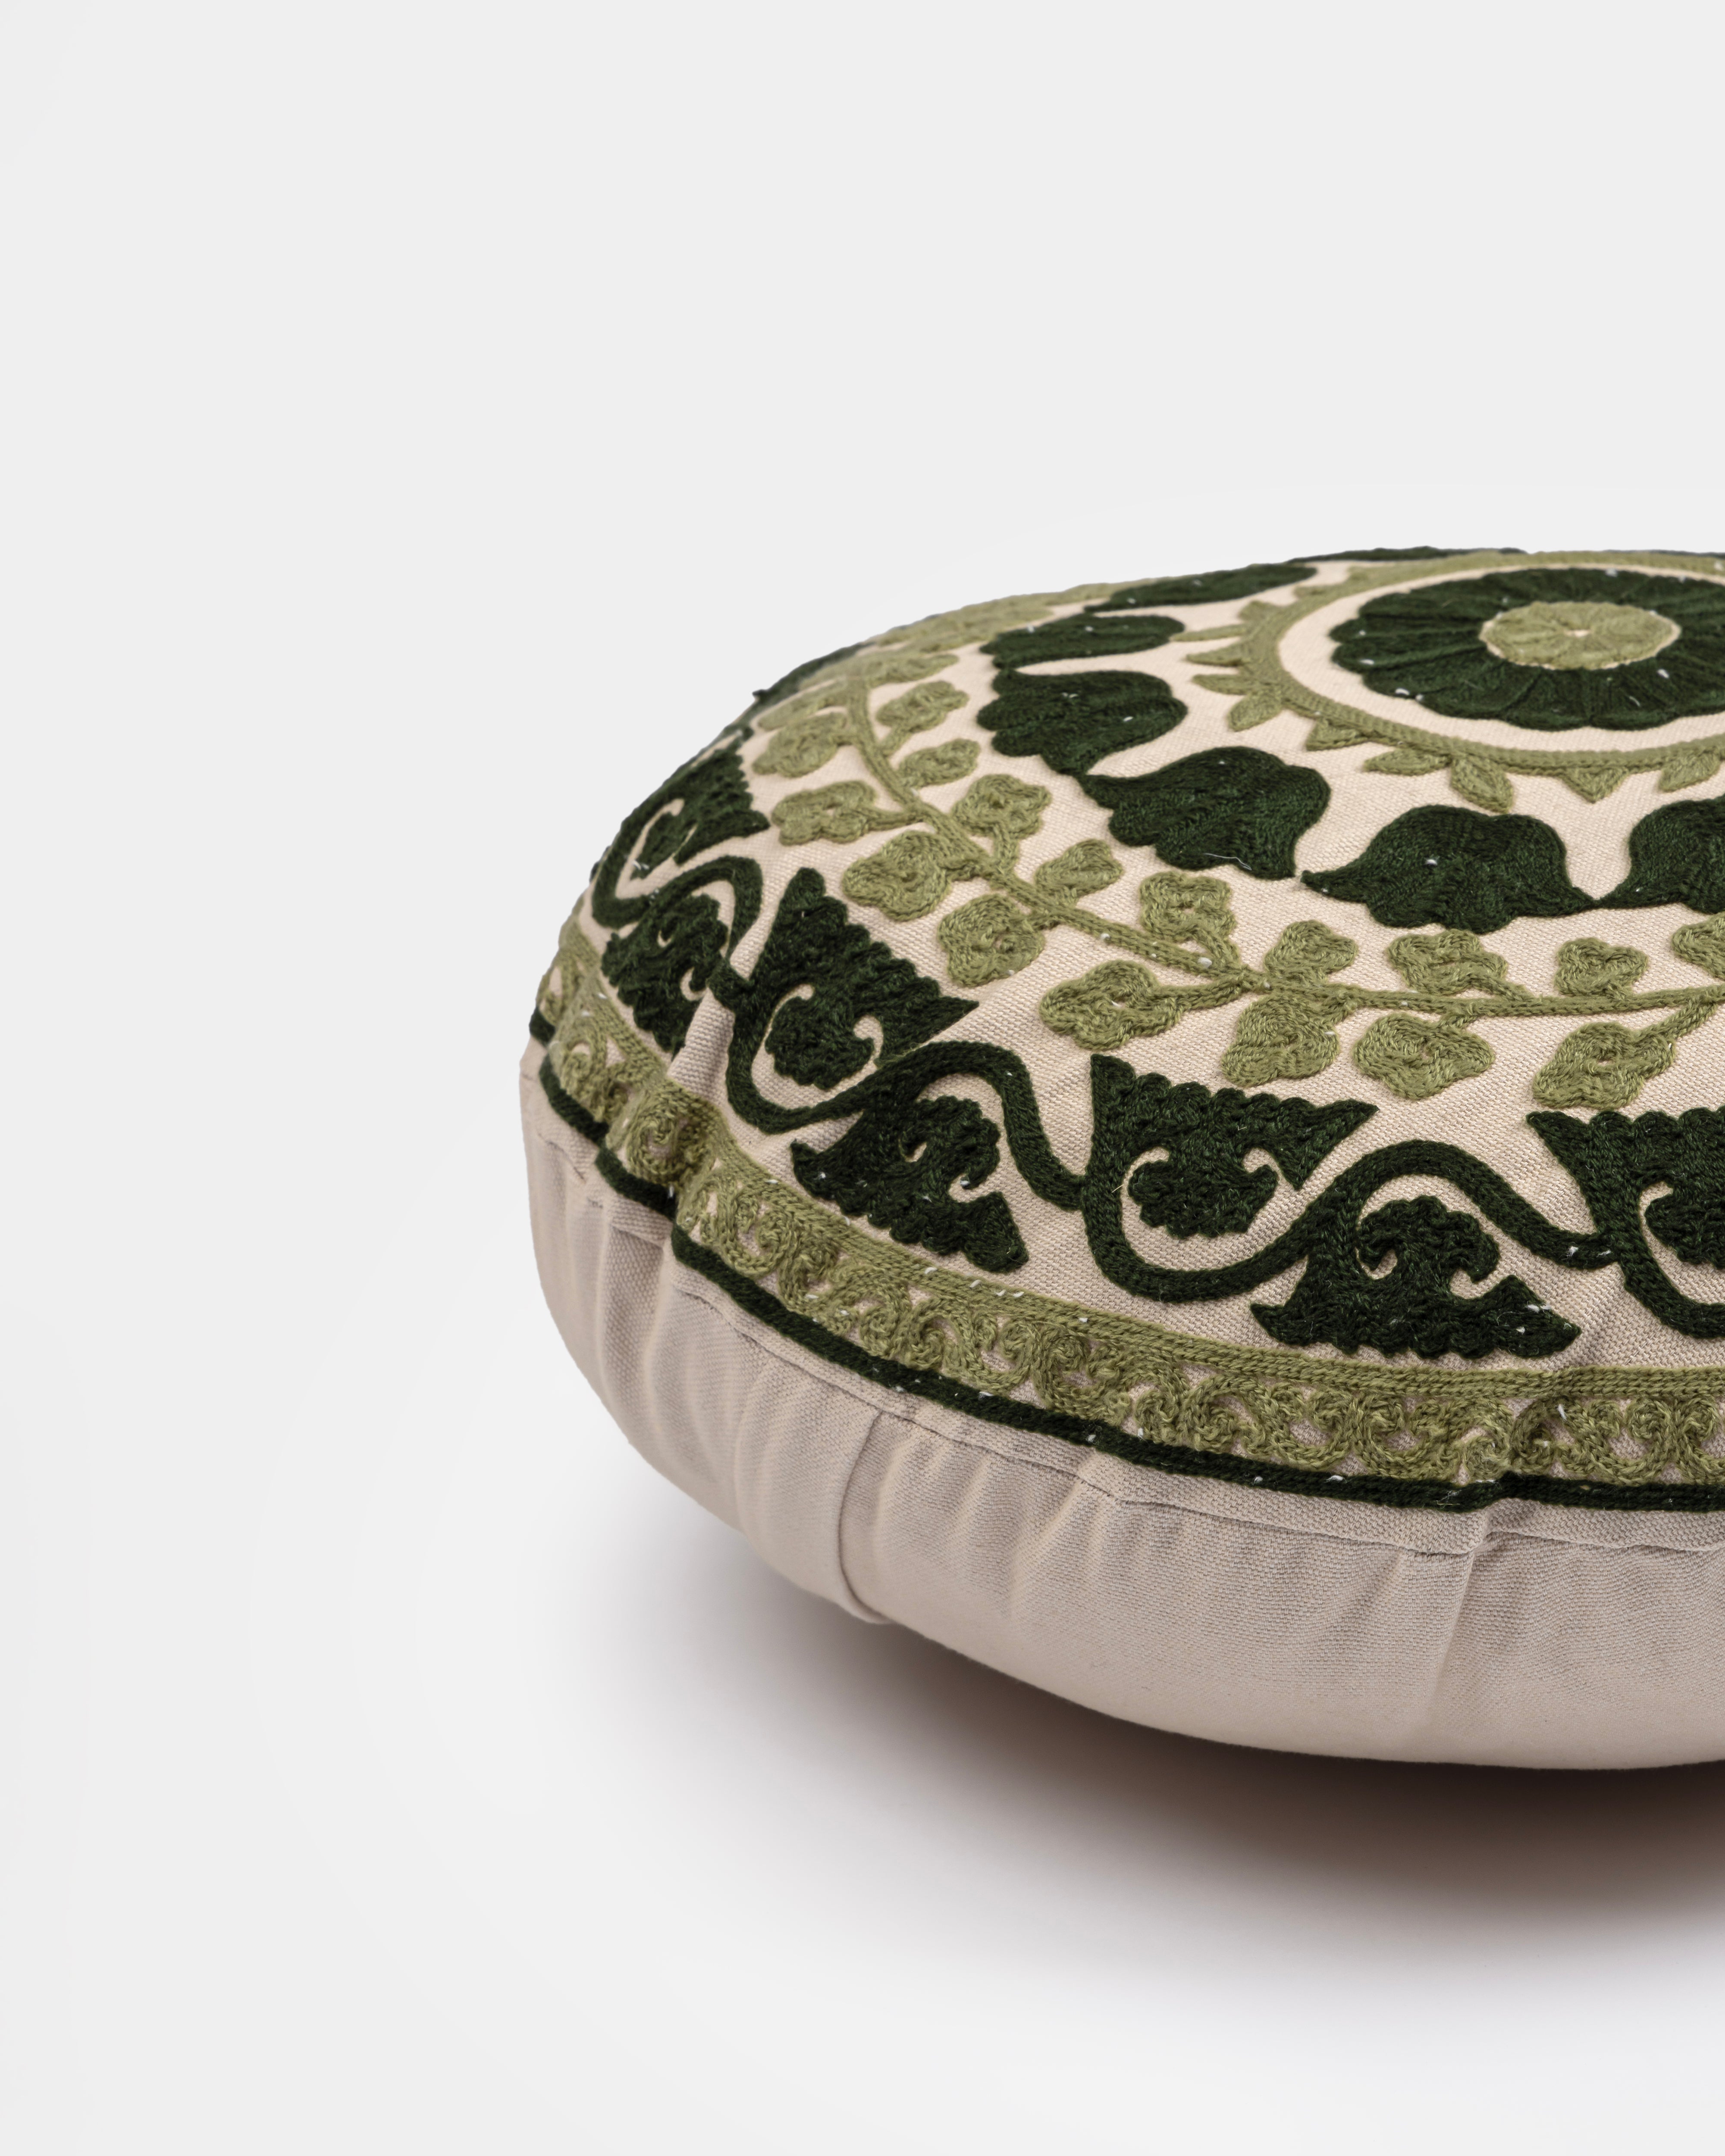 Suzani Pillow | Green Pillow Cover Flora 16" Round | Made in Jaipur